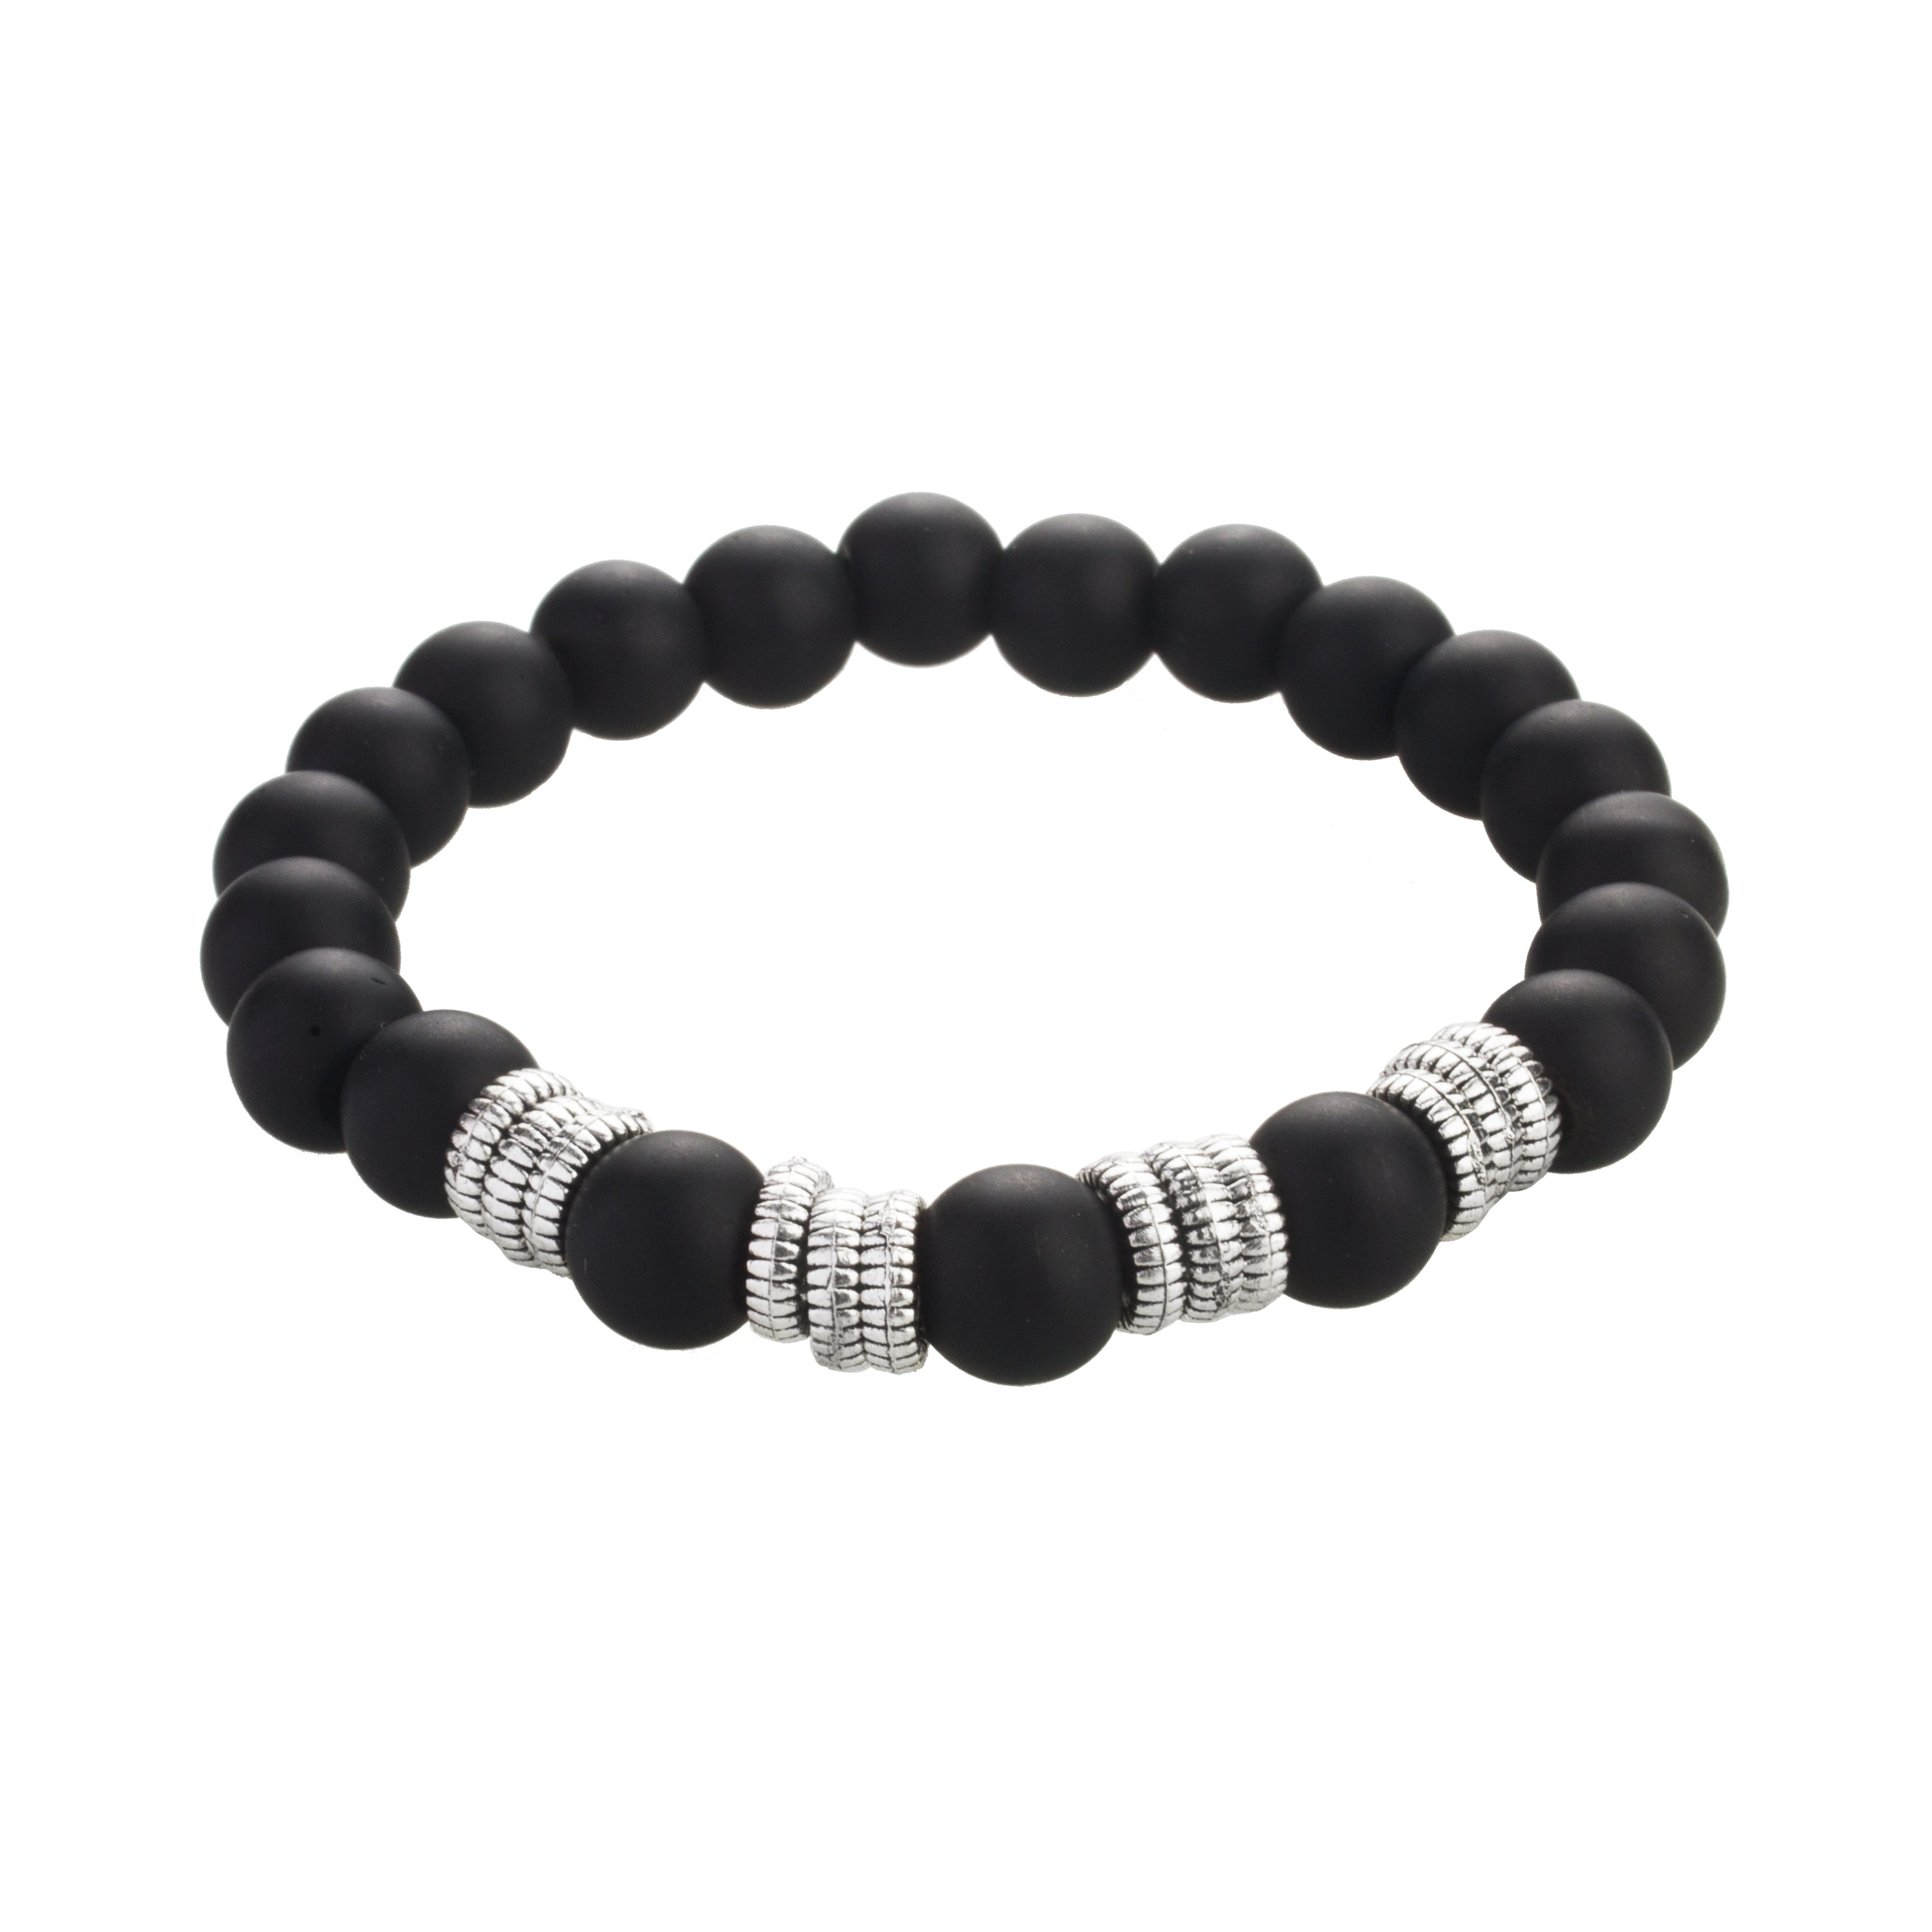 Onyx Bead Bracelet with 2 Silver Dice Beads and Logo Ring – King Baby